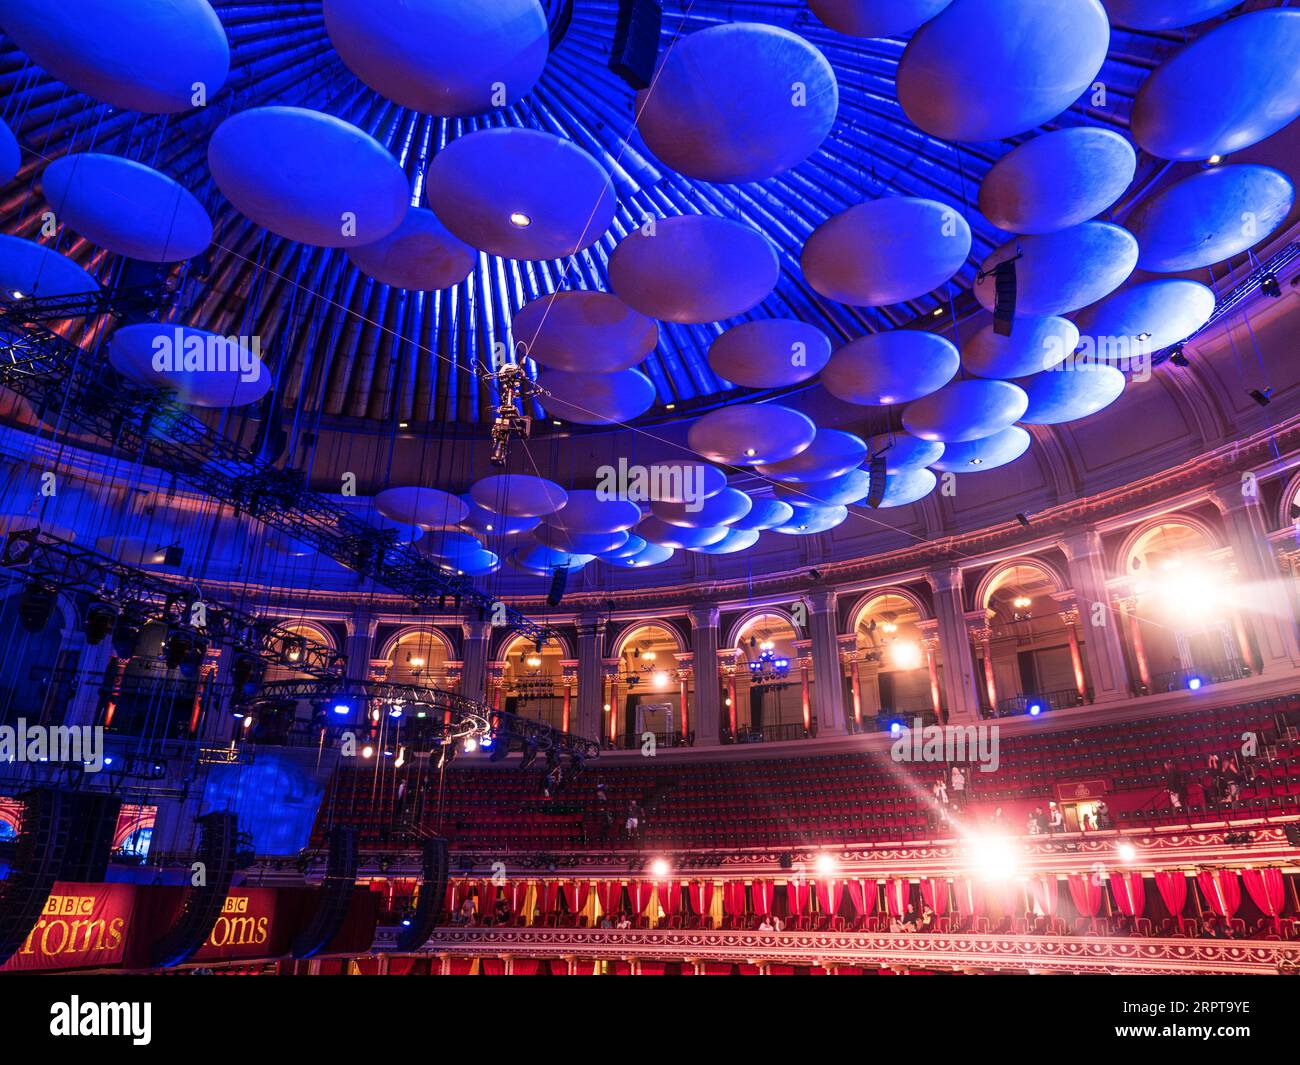 ALBERT HALL ACOUSTIC SOUND CORRECTION REFLECTORS in dome of Albert Hall with TV lighting flare flaring and 'Proms Signs' Albert Hall Kensington London UK. Promenade Concerts Auditorium Interior Stock Photo